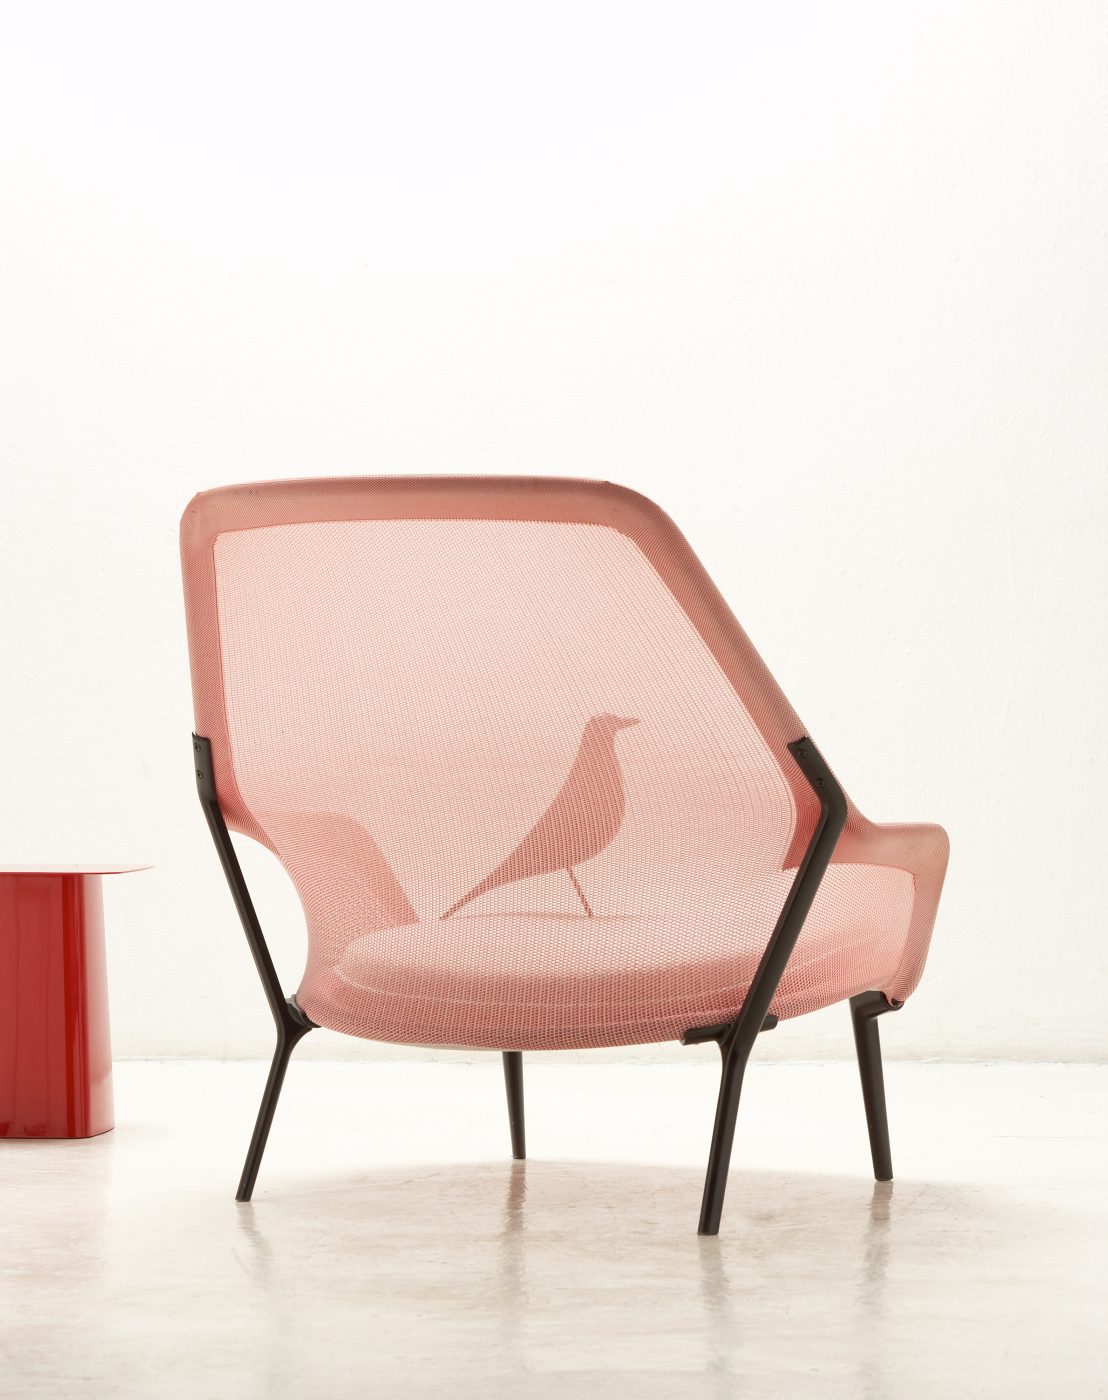 Vitra’s 2006 Slow chair